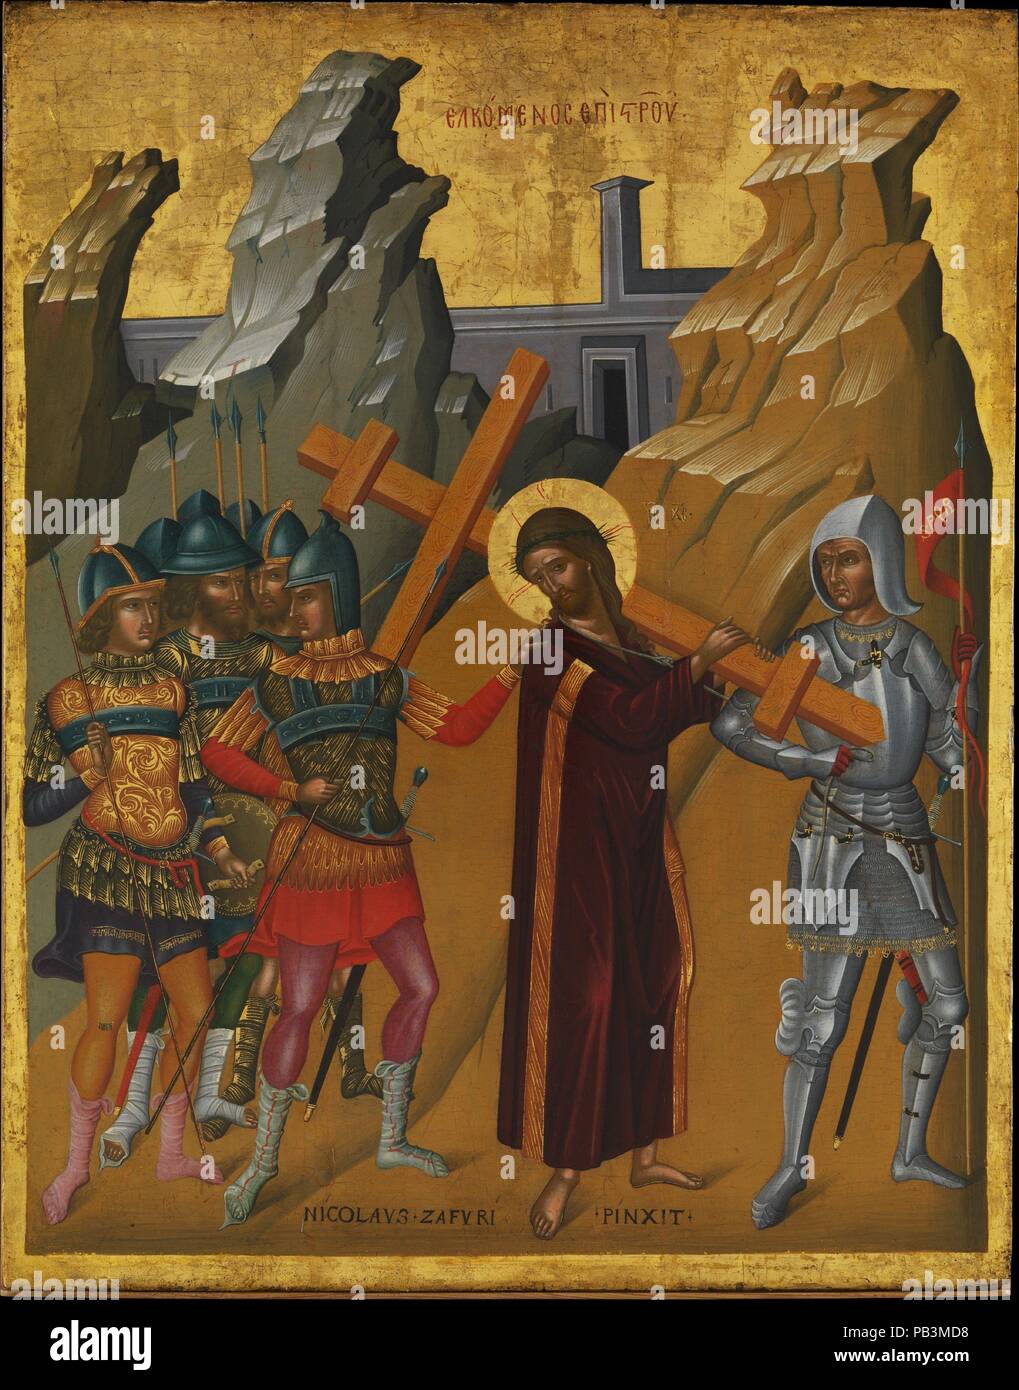 Christ Bearing the Cross. Artist: Nicolaos Tzafouris (Greek, ca. 1455-1500/1501). Dimensions: 27 1/4 x 21 1/2 in. (69.2 x 54.6 cm).  Nicholaos Tzafouris was one of the many icon painters working in the city of Candia (now Iraklion) in Crete at the time when Crete was under the control of Venice. The combination of Byzantine and Latin elements seen in many Cretan icons was well received locally and in Italy. The Greek inscription on this icon describes a Byzantine icon type in which soldiers drag Christ to Golgotha. The image here, however, is western in type, showing Christ carrying the cross  Stock Photo